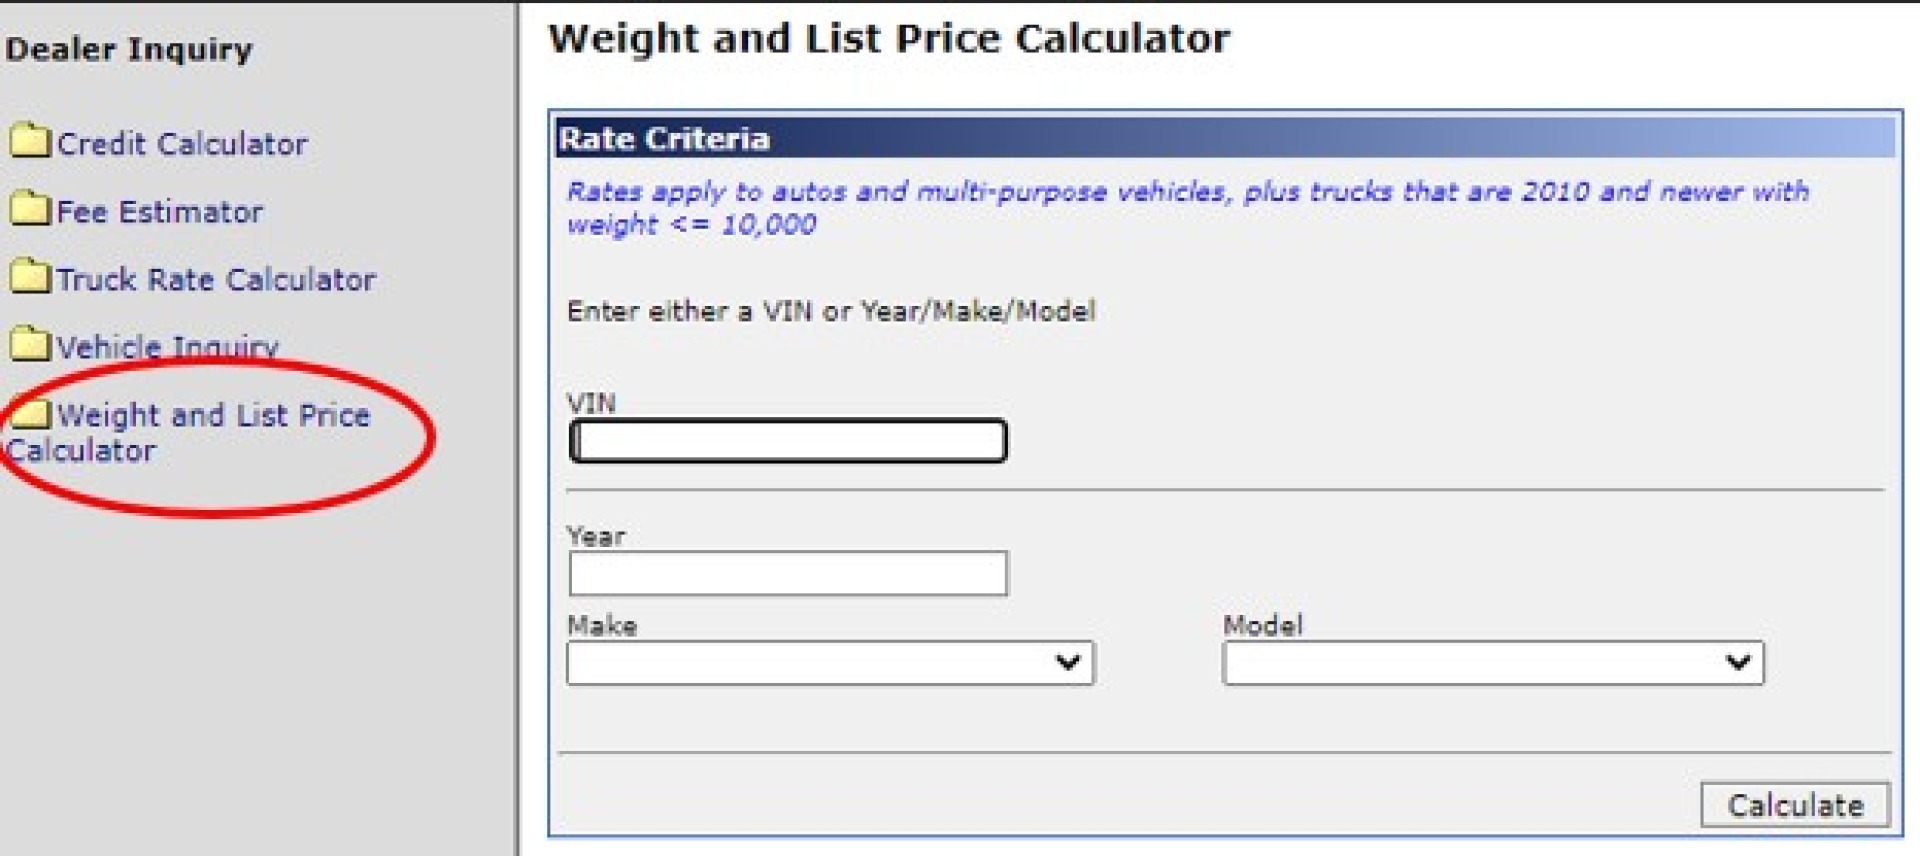 Weight and List Price Calculator